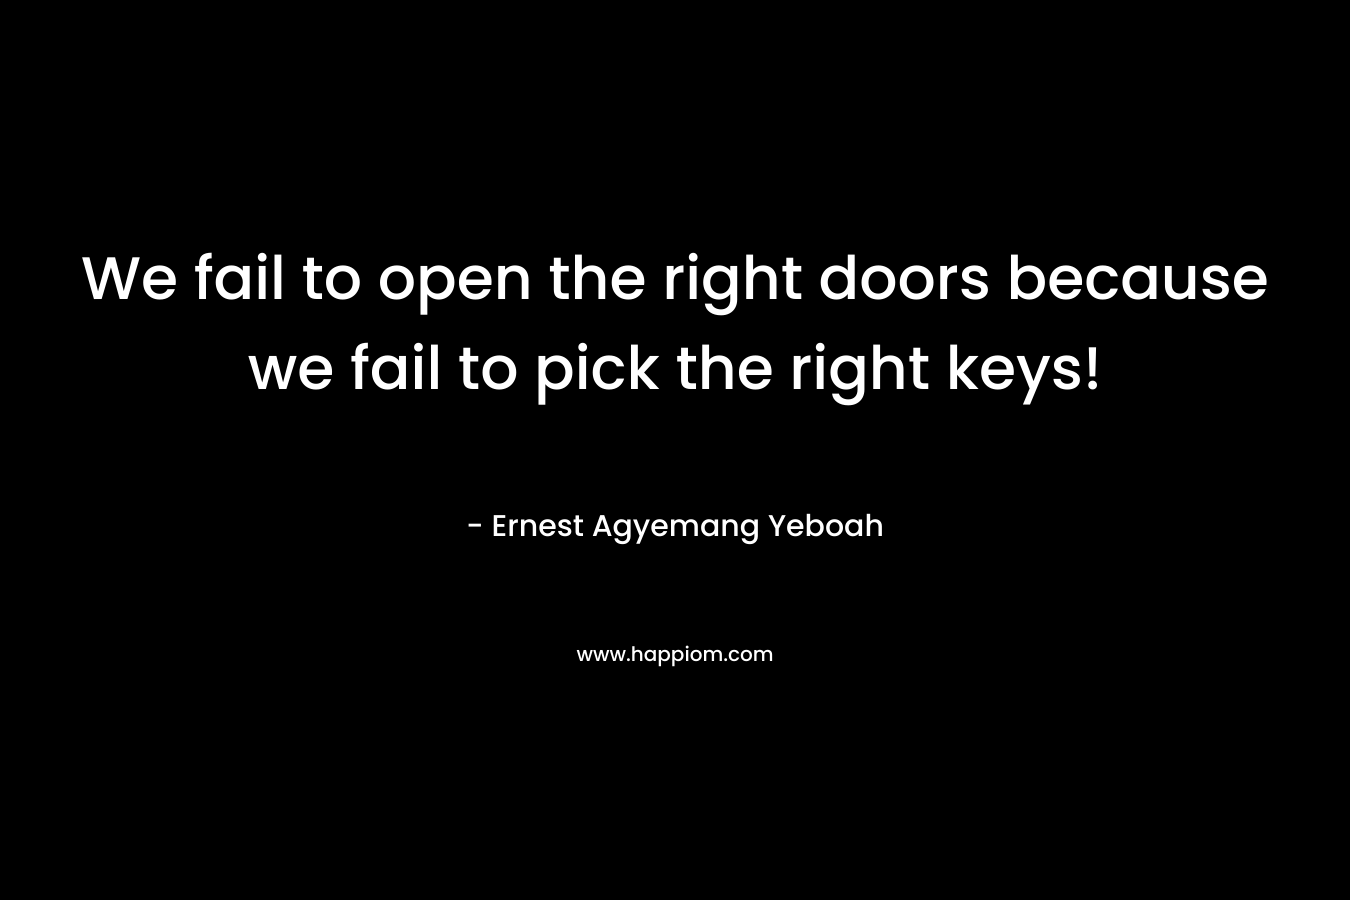 We fail to open the right doors because we fail to pick the right keys! – Ernest Agyemang Yeboah